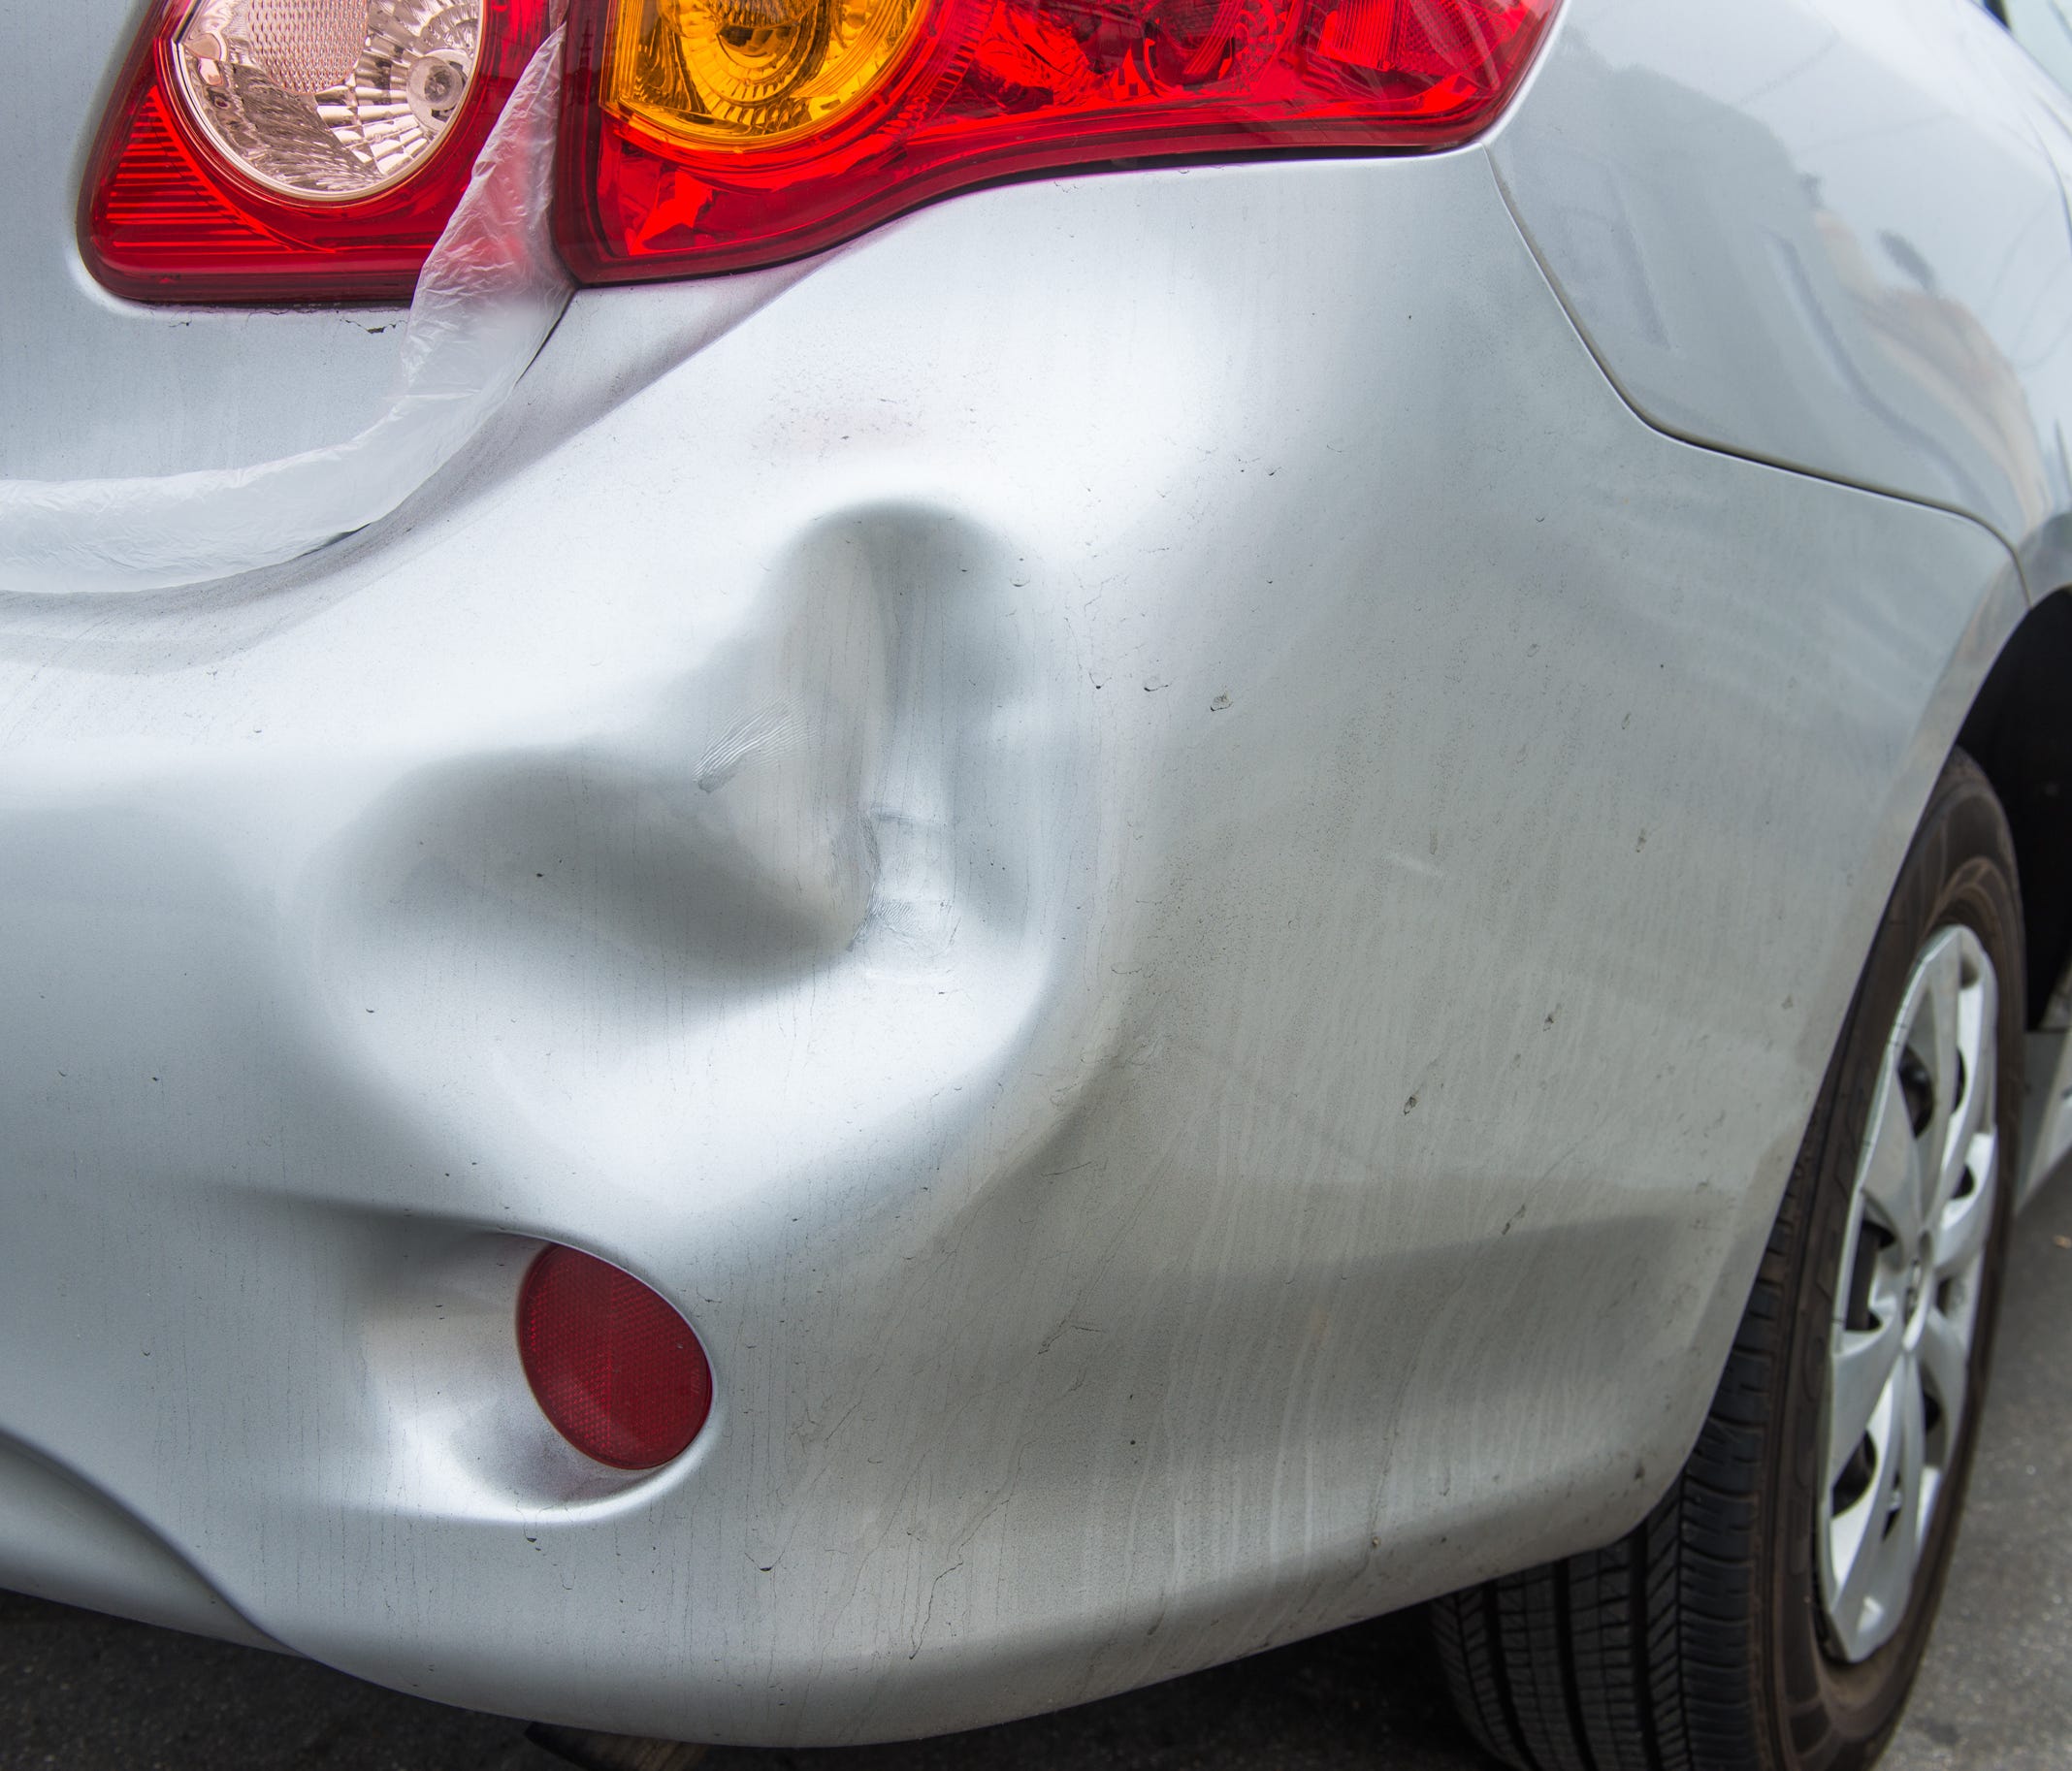 When you buy a collision damage waiver, the rental company surrenders its rights to charge you for damage to a car rental — with a few exceptions, such as tire damage.